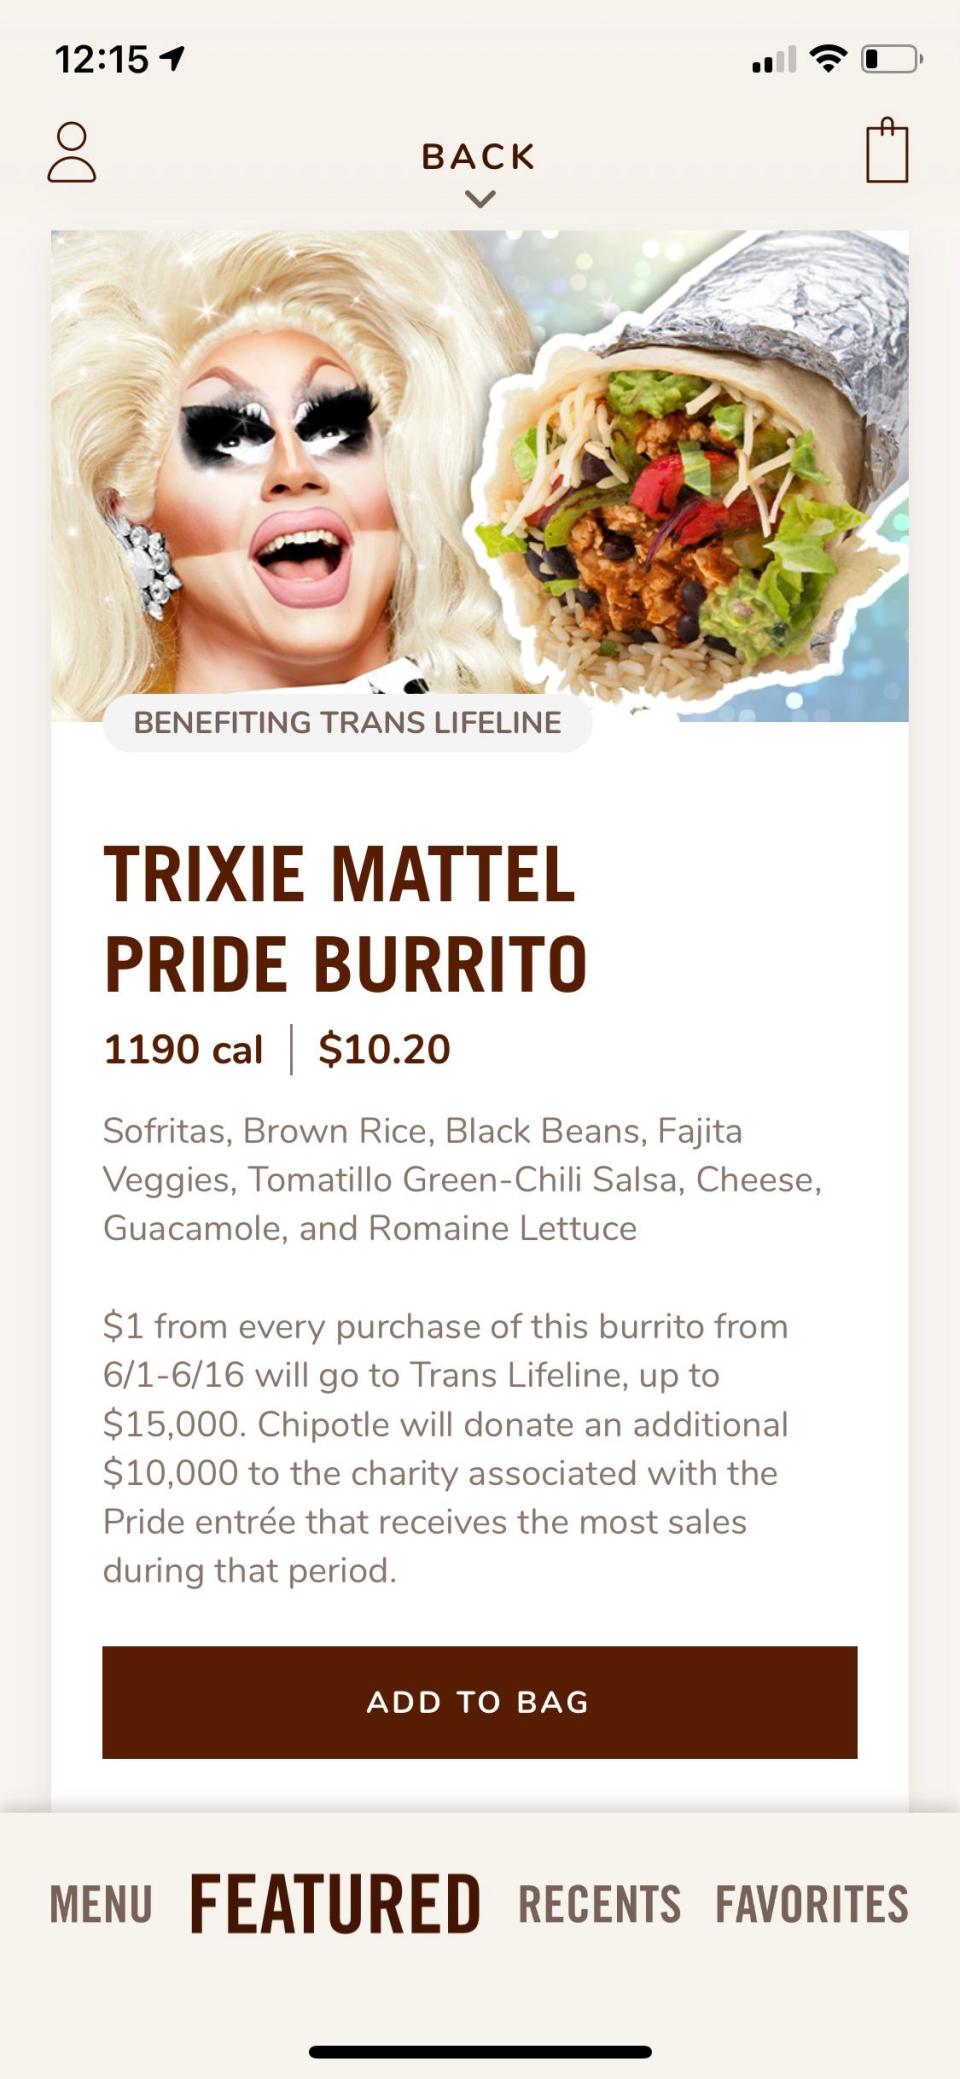 Chipotle is offering go-to meals from three drag performers -- Trixie Mattel, Kim Chi, and Gottmik -- through June 16, with $1 from each entree order benefitting a LGBTQ charity of their choice.